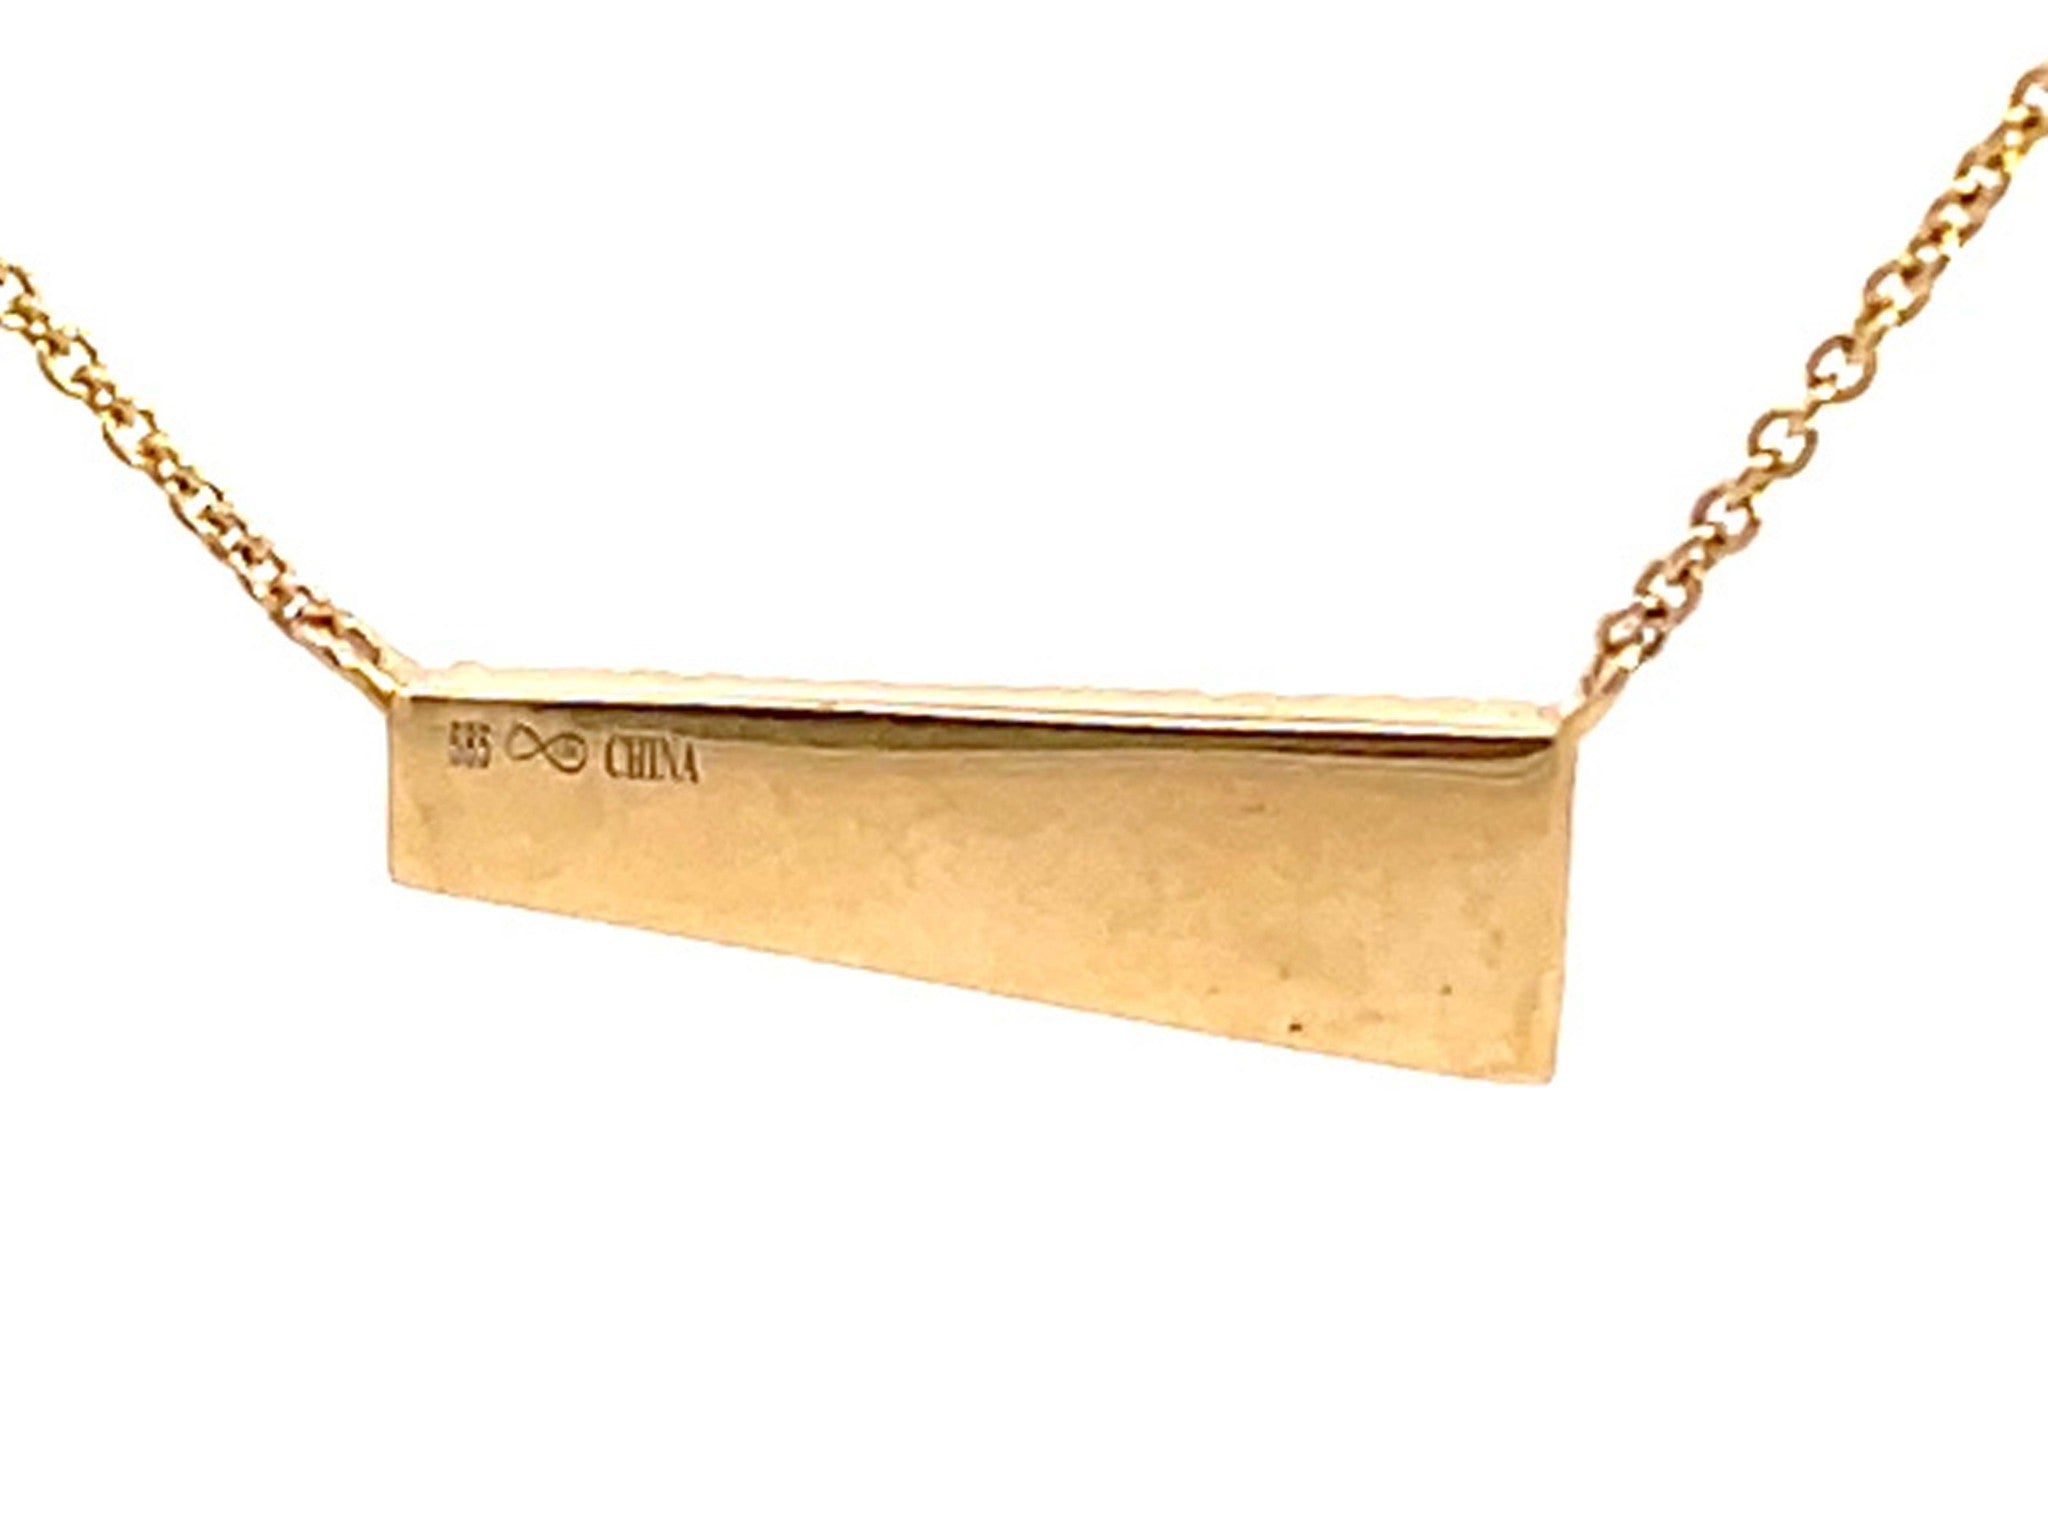 Diamond Bar Necklace in 14k Yellow Gold